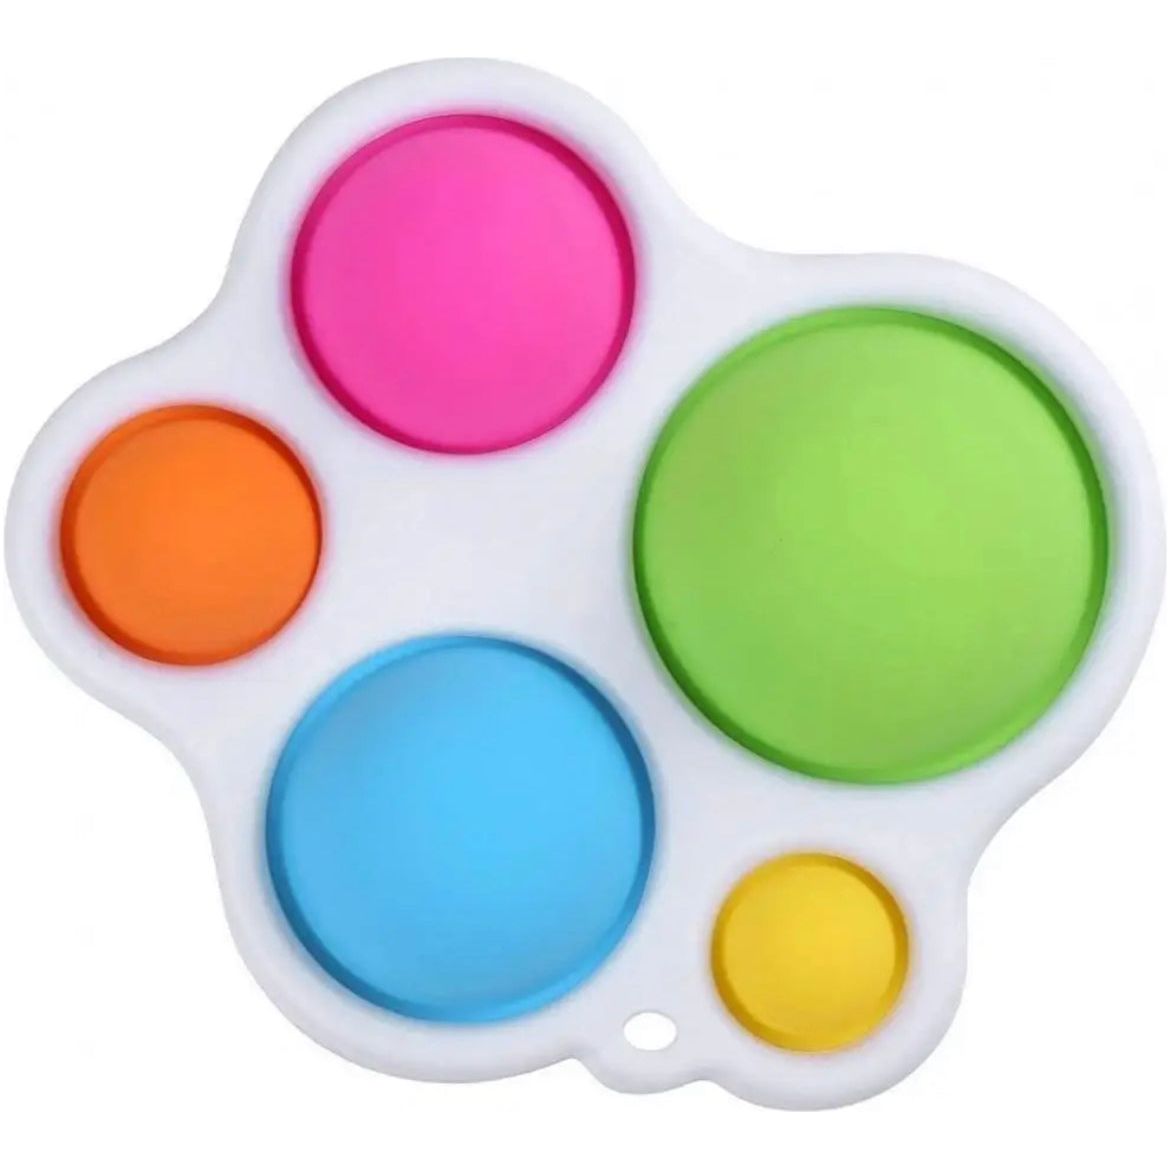 Pibi Pop It Stress Relieving Sensory Toy Multicolor Age- 3 Years & Above